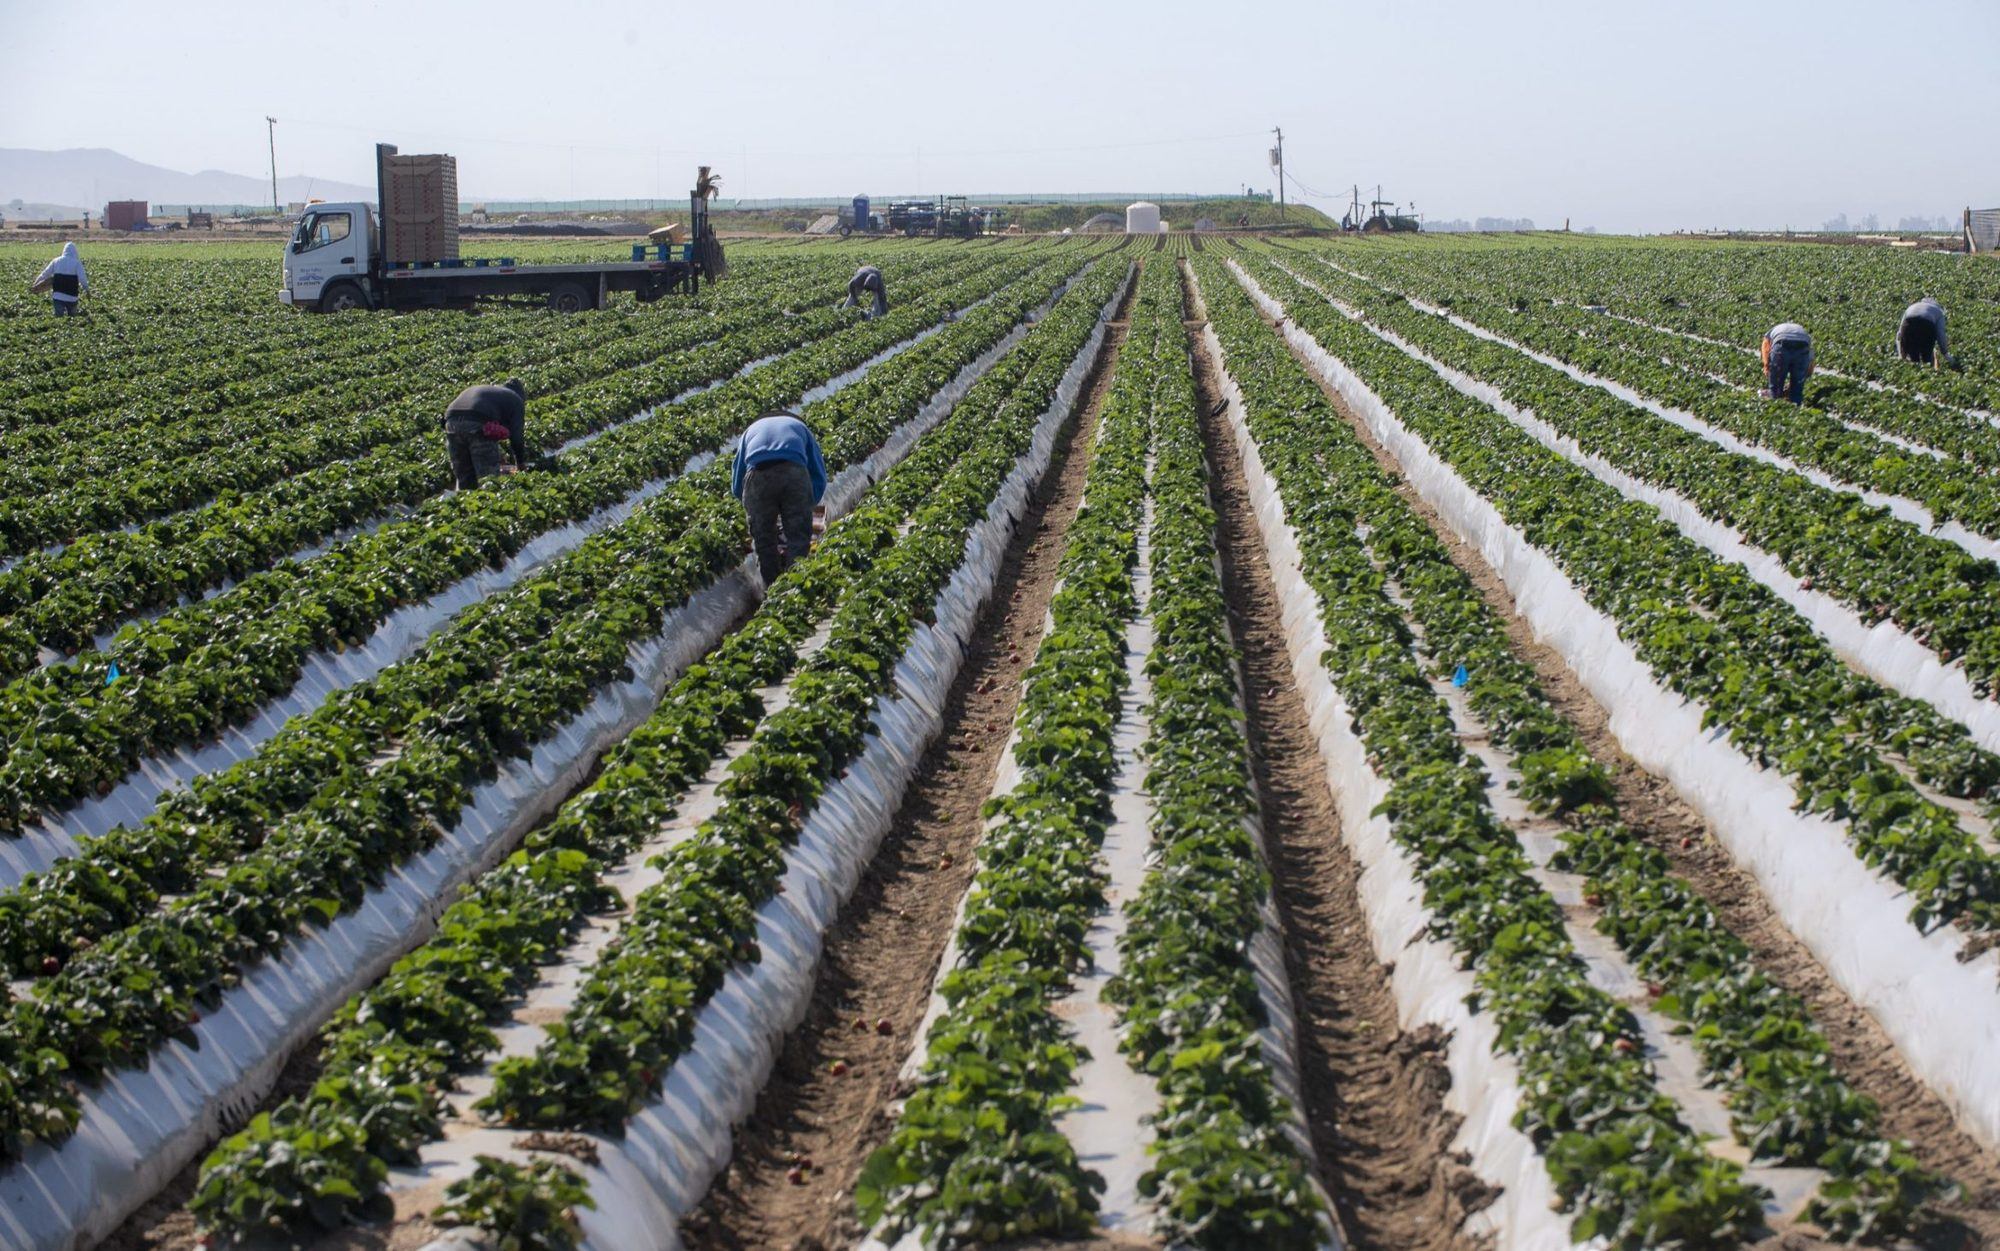 Fieldworkers are photographed picking strawberries on Saturday, April 25, 2020. Photo by David Rodriguez, The Salinas Californian.